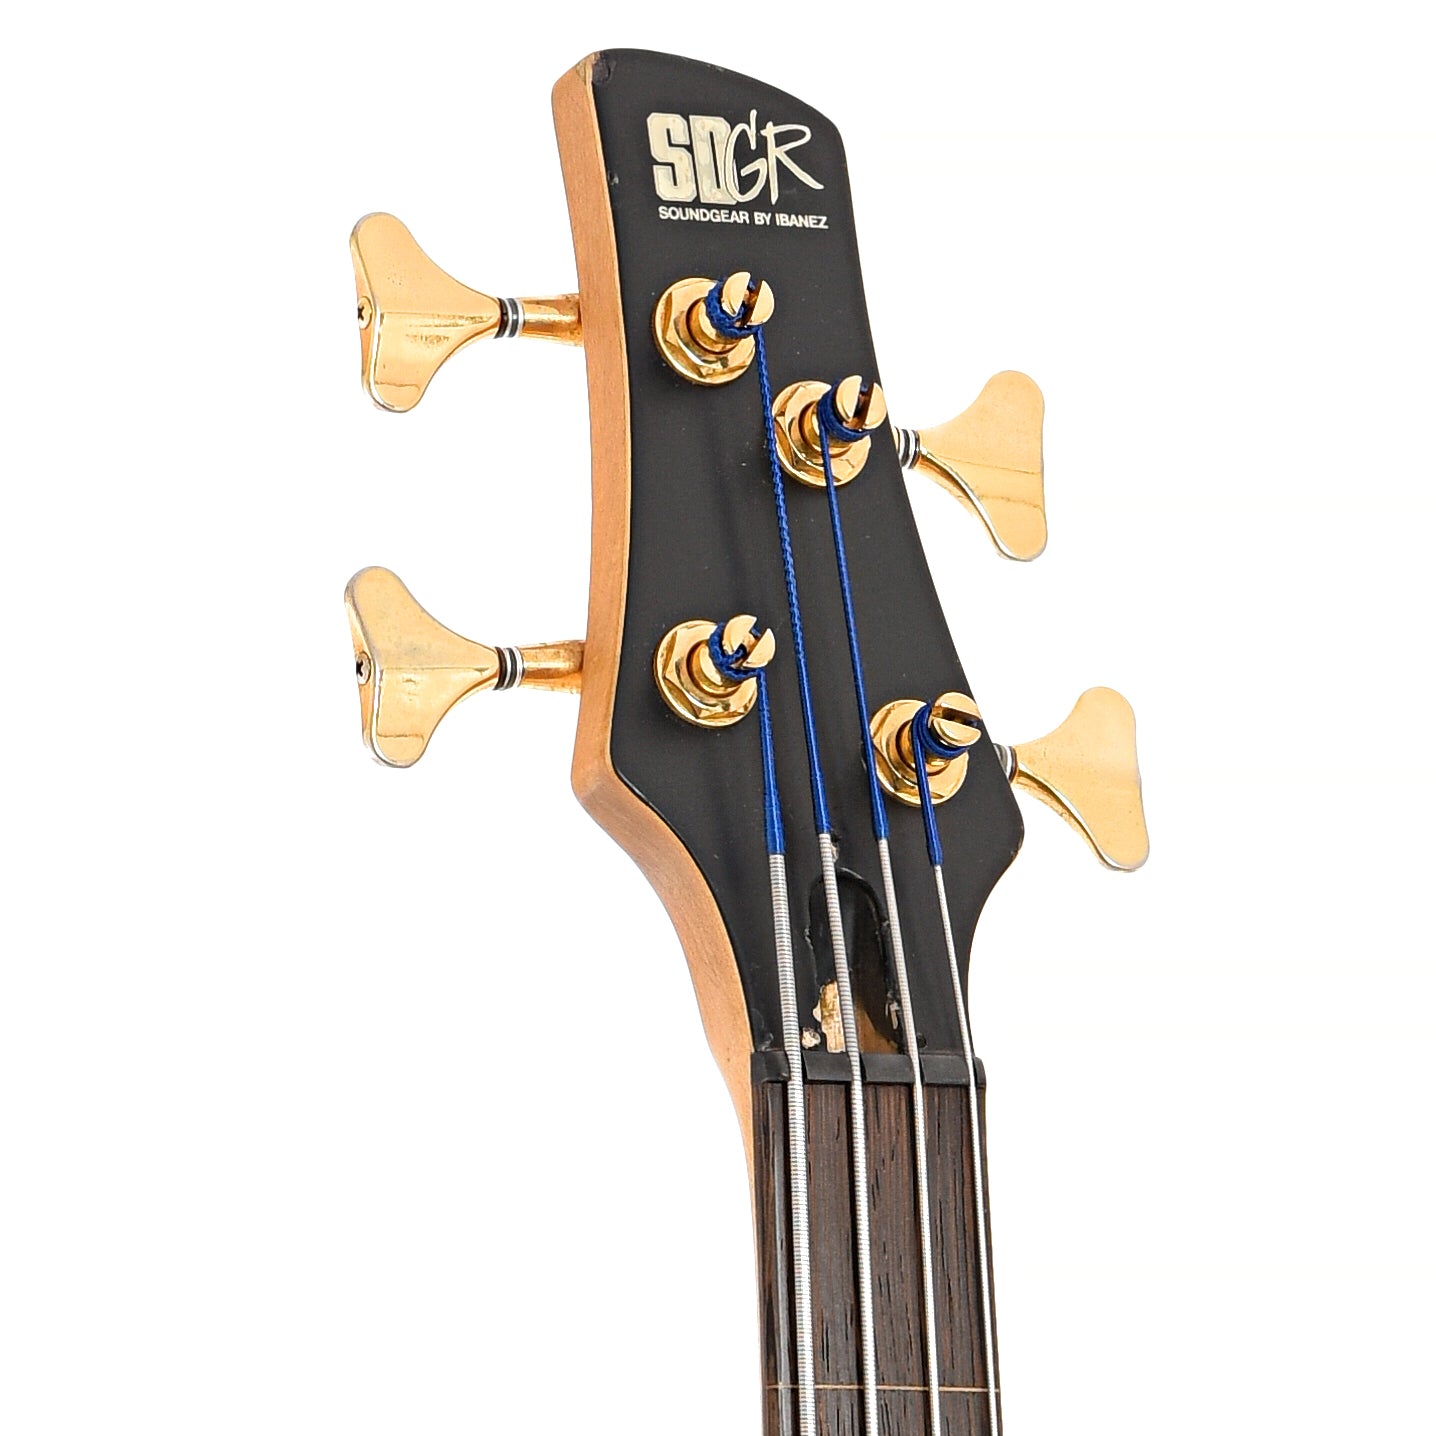 Front headstock of Ibanez SR2000 Fretless Electric Bass